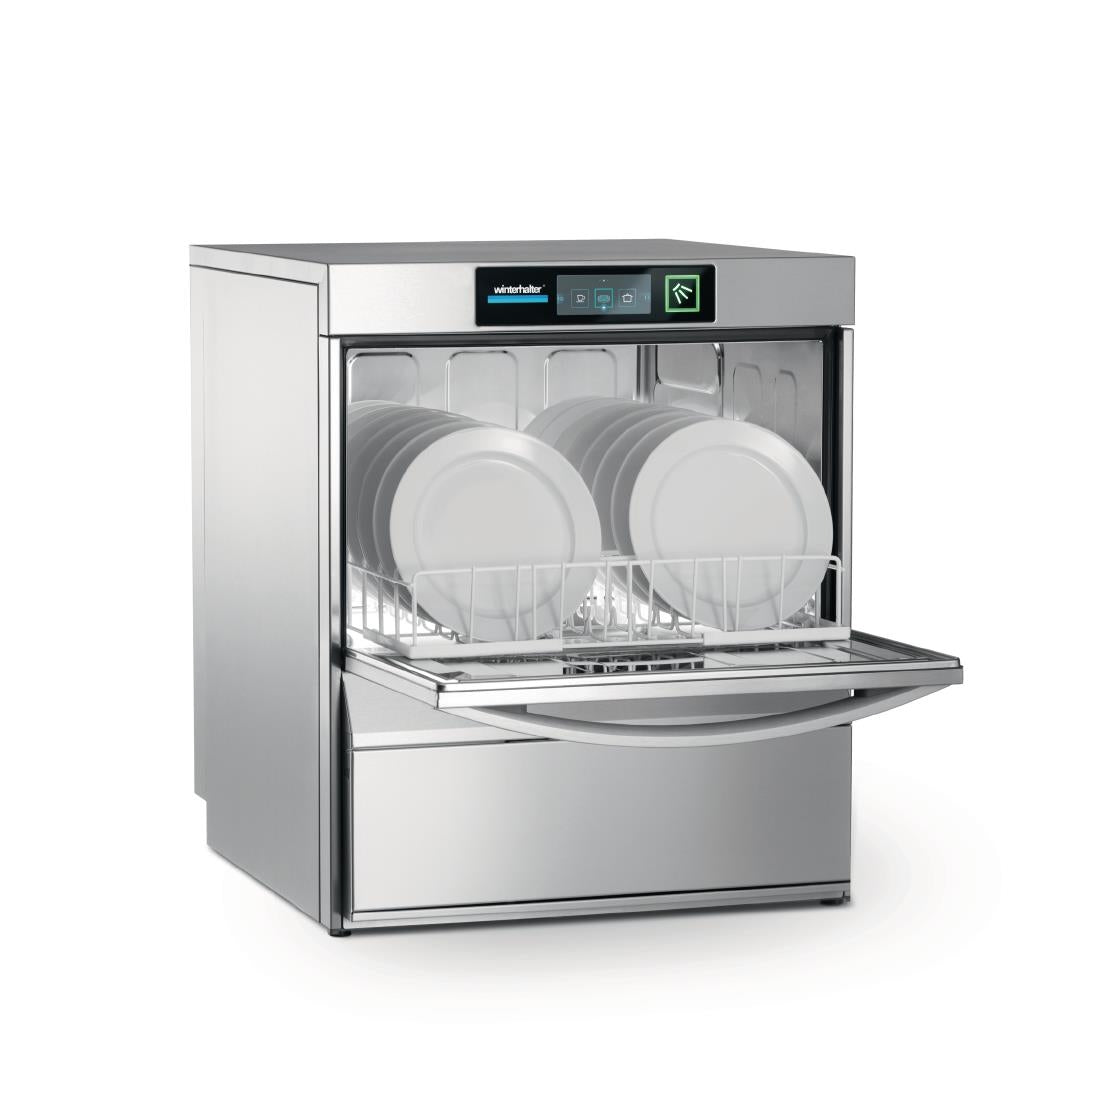 Winterhalter Undercounter Thermal Disinfection Dishwasher UC-M with Install